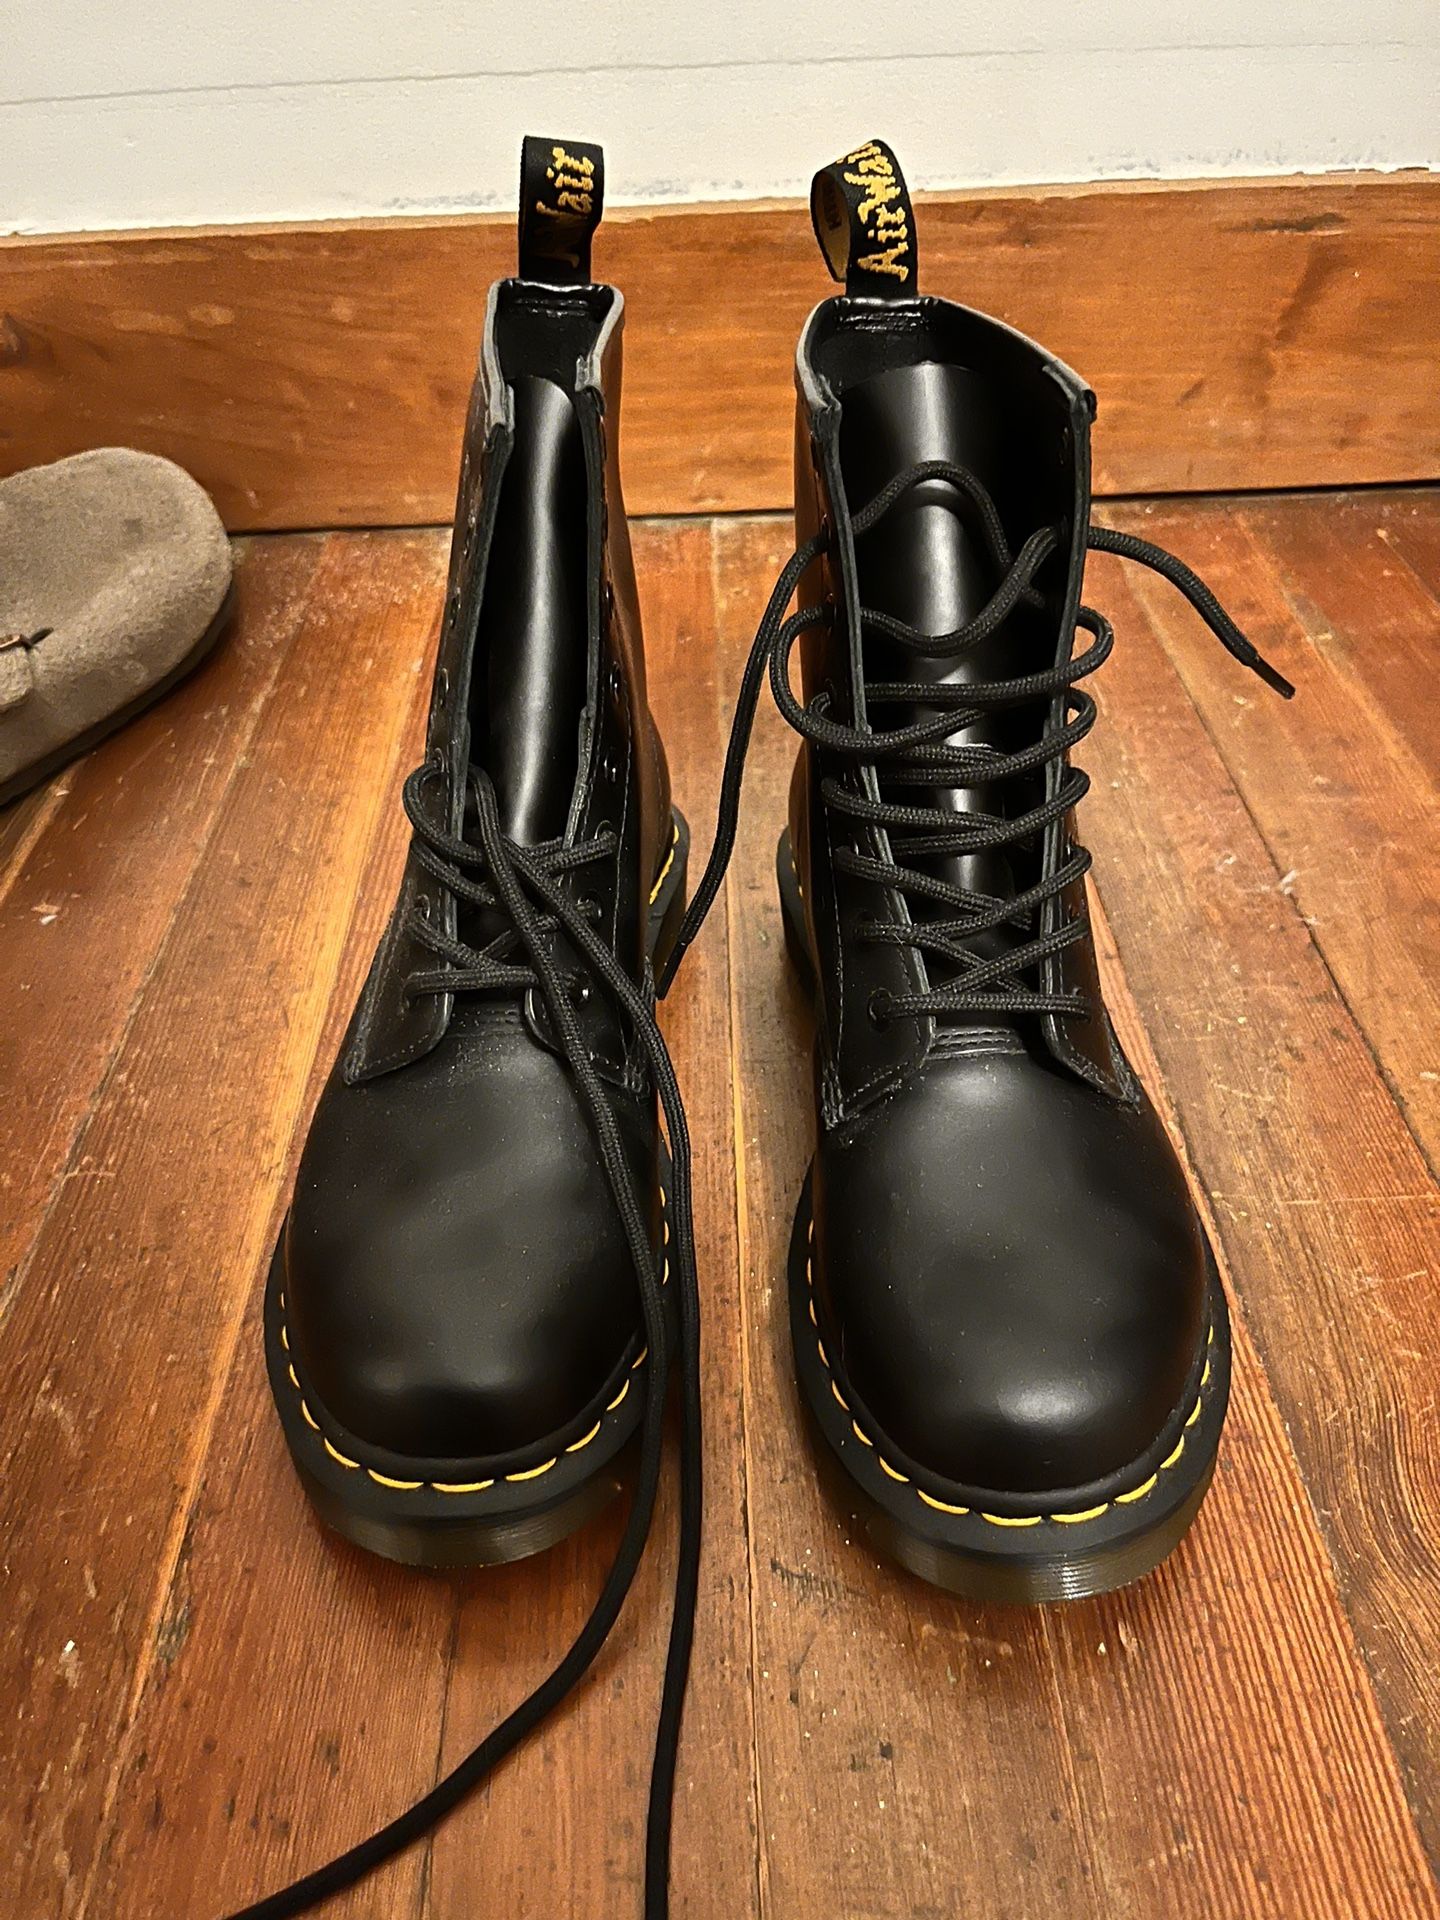 New Dr Martens Boots